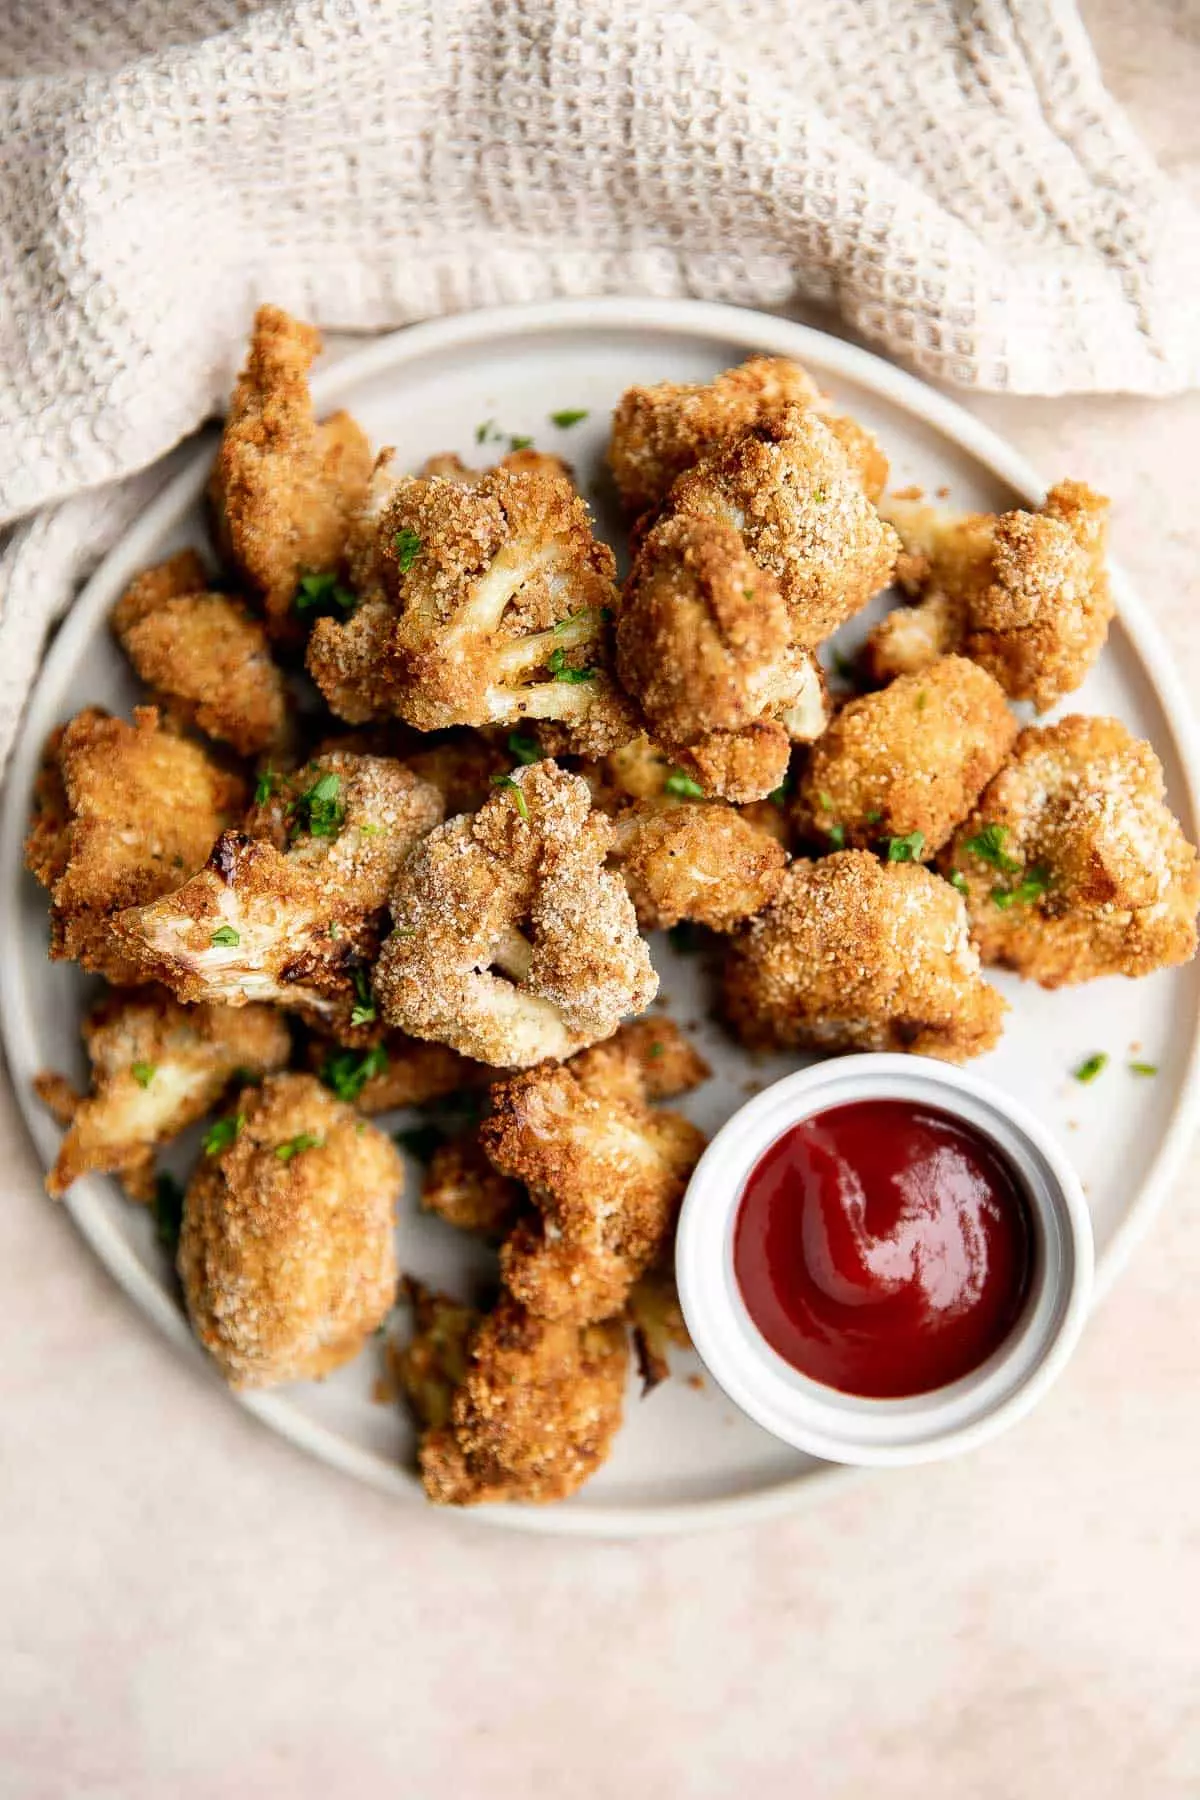 Air fryer cauliflower bites have a crispy breaded coating outside, yet tender and light inside. They are bite-sized, flavorful, easy to make, and healthy.